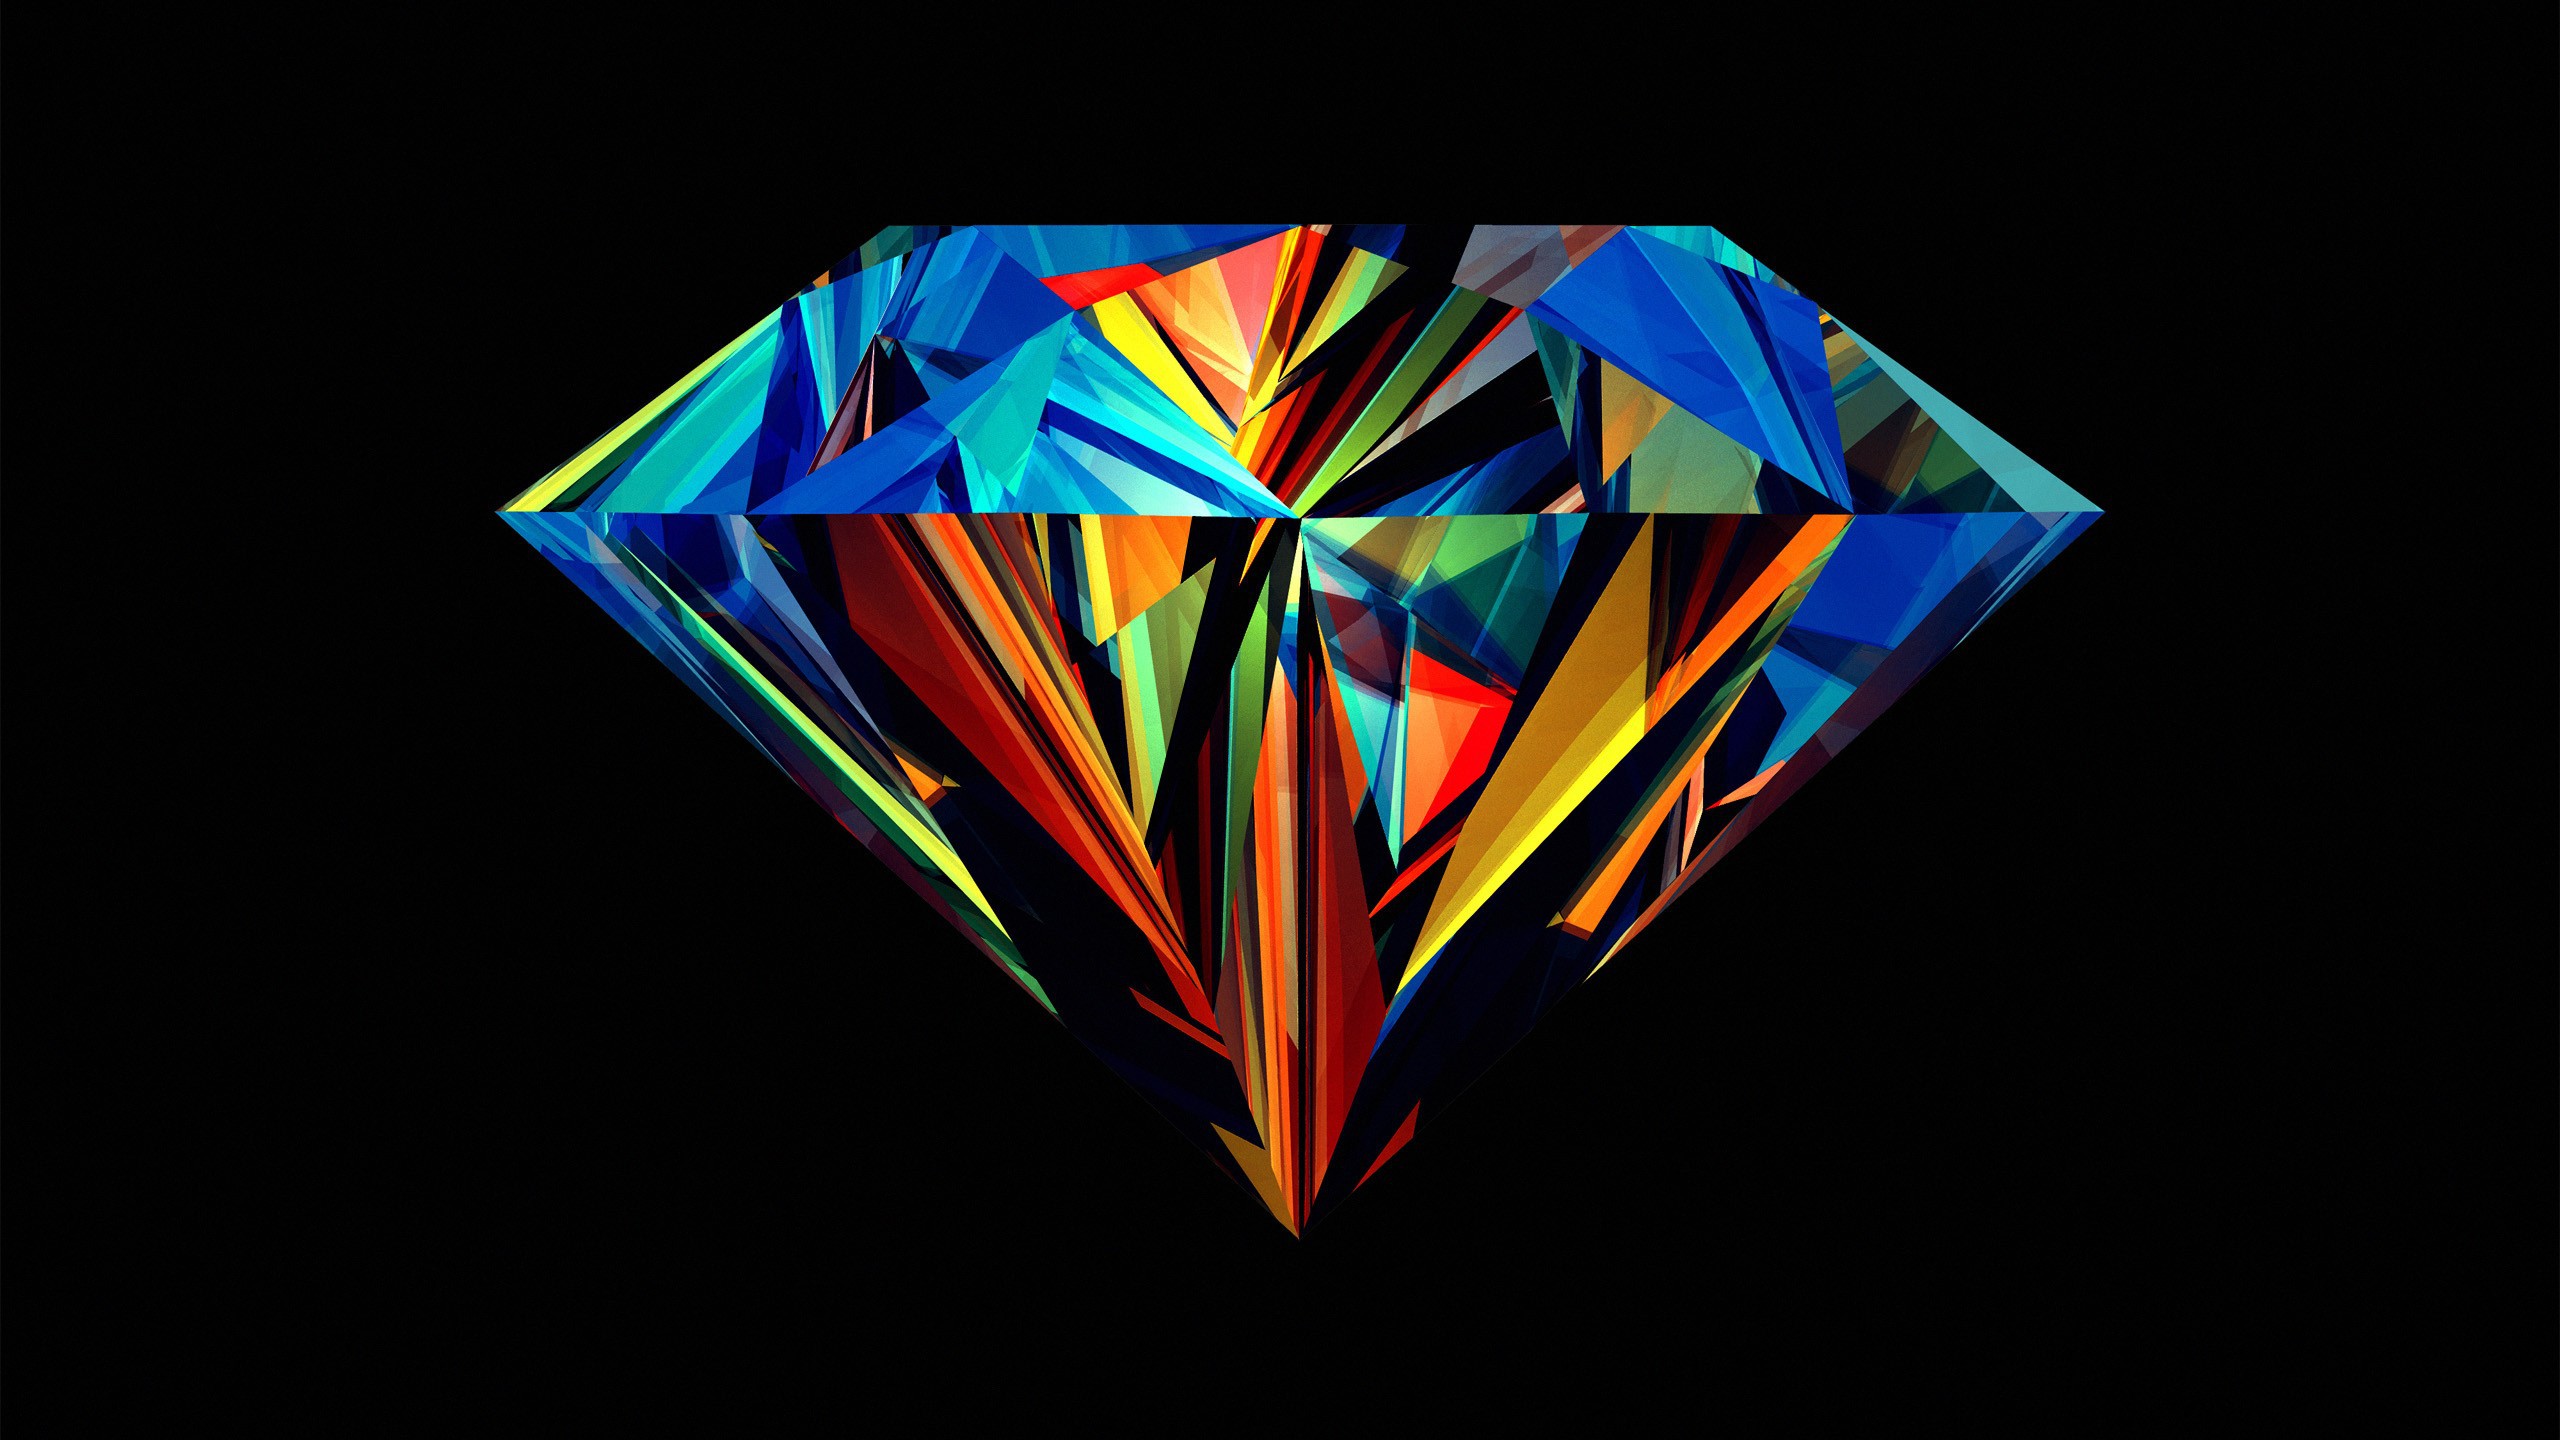 Multi-colored crystal wallpapers and images - wallpapers, pictures ...